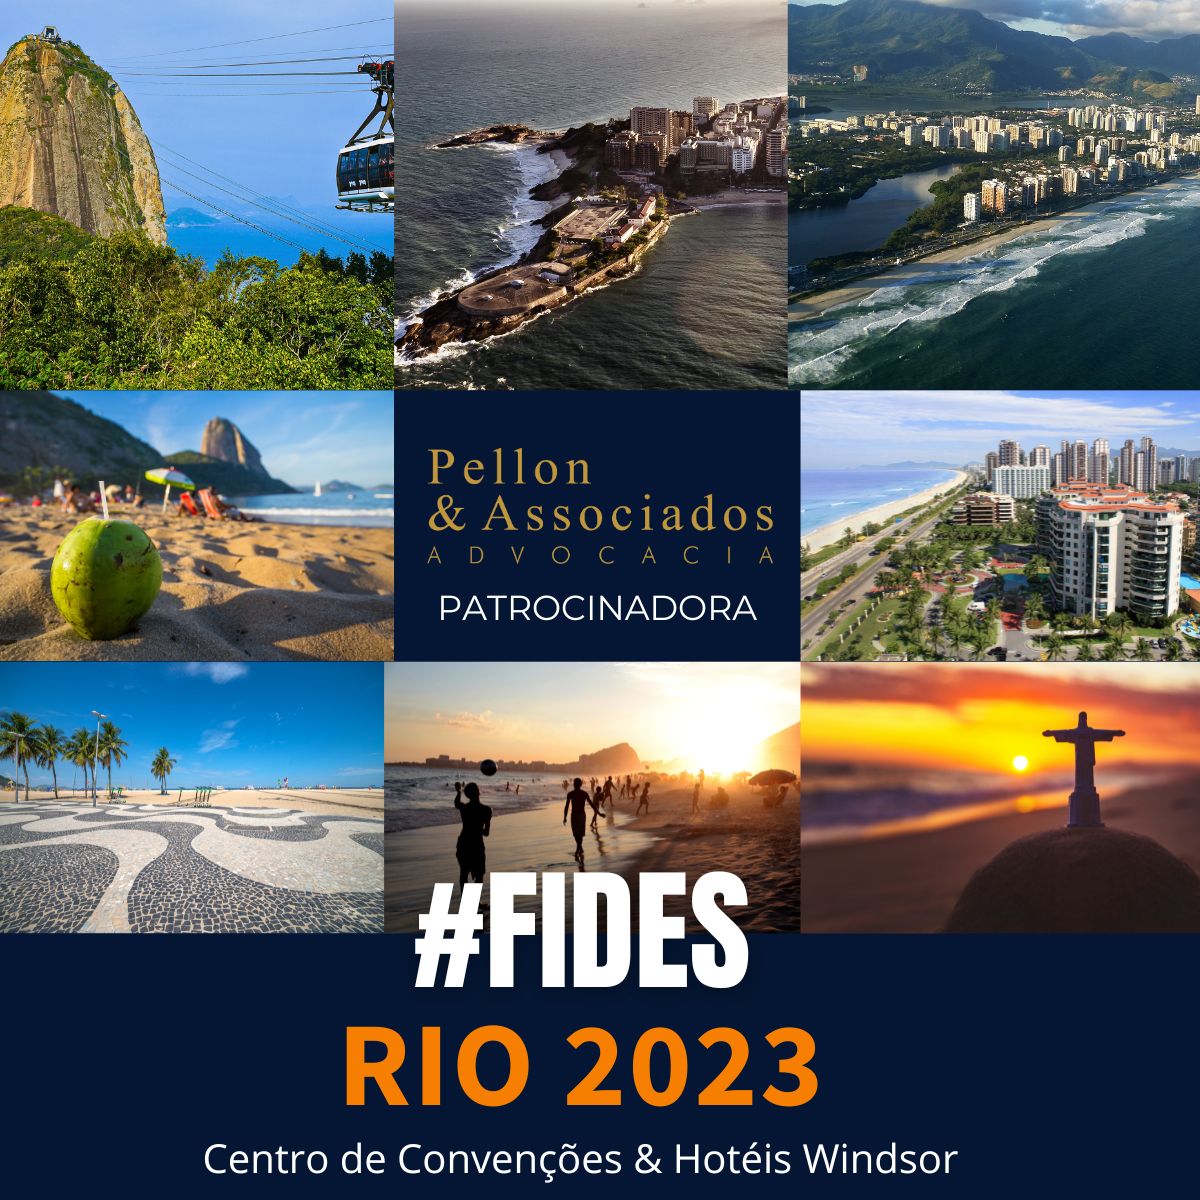 FIDES RIO 2023: “Insurance is a people-to-people business”, says David Colmenares